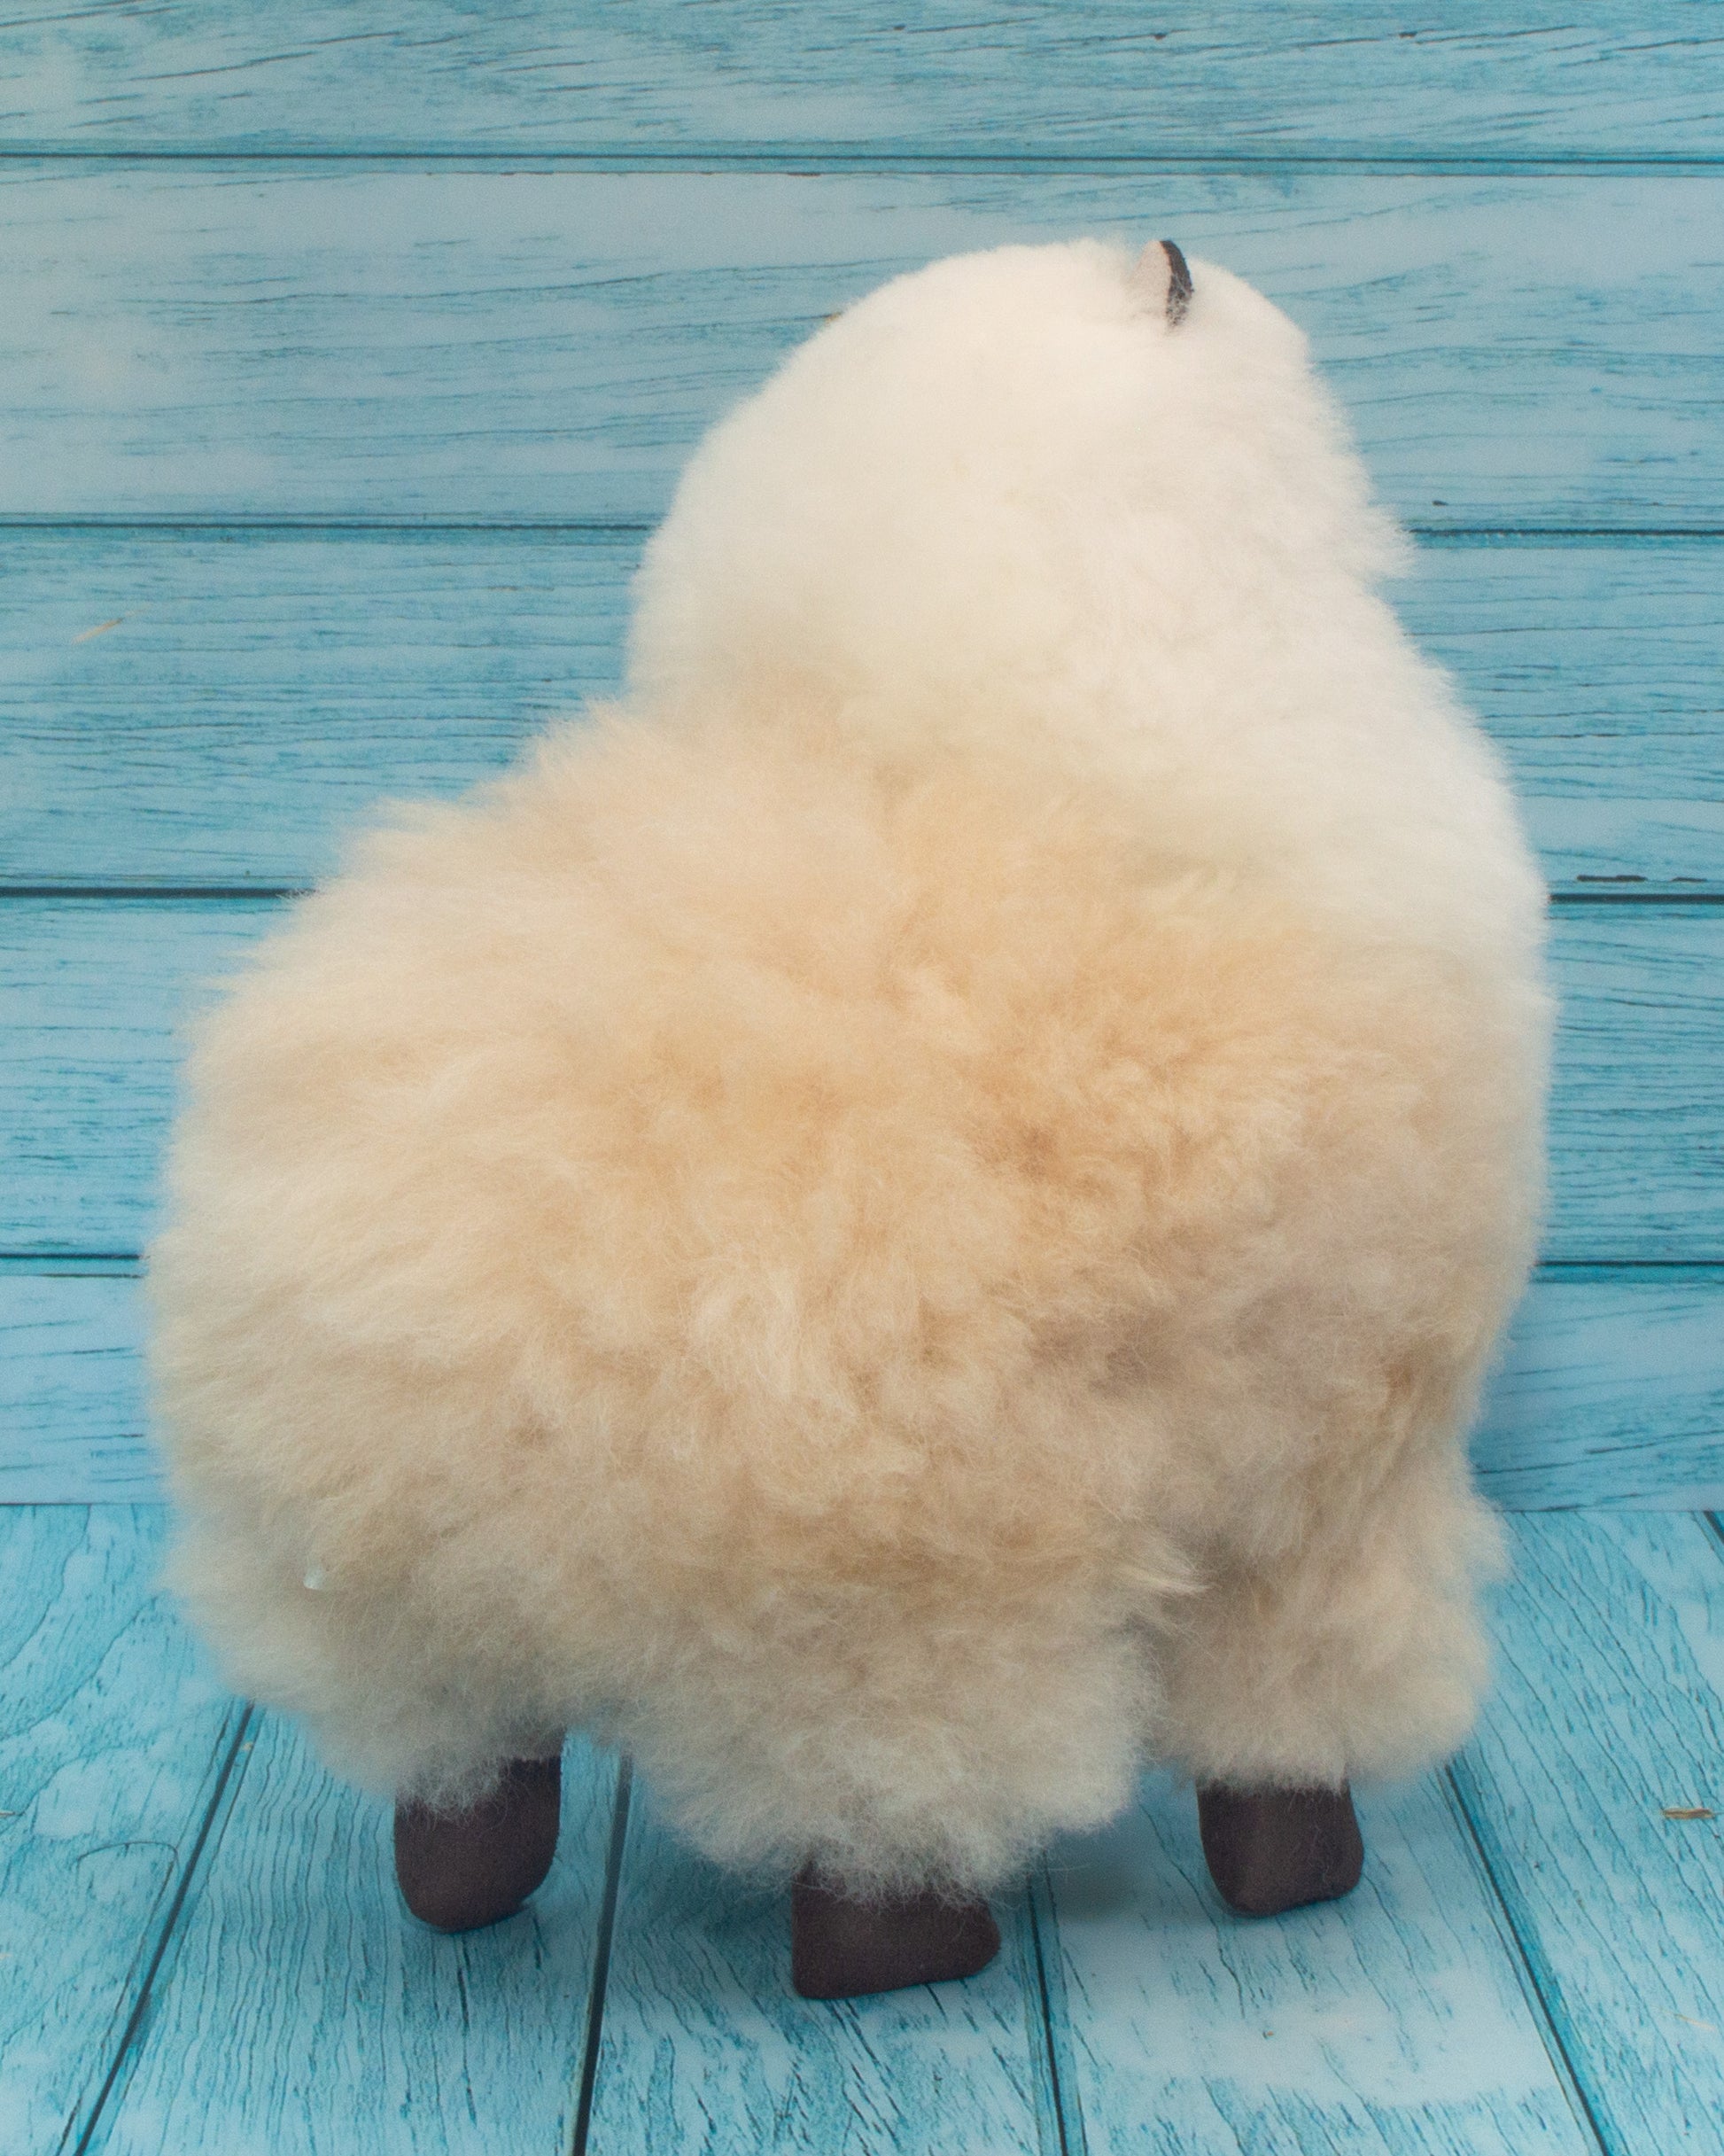 Soft alpaca stuffed animal. Beige and white, 9 inches. Back view